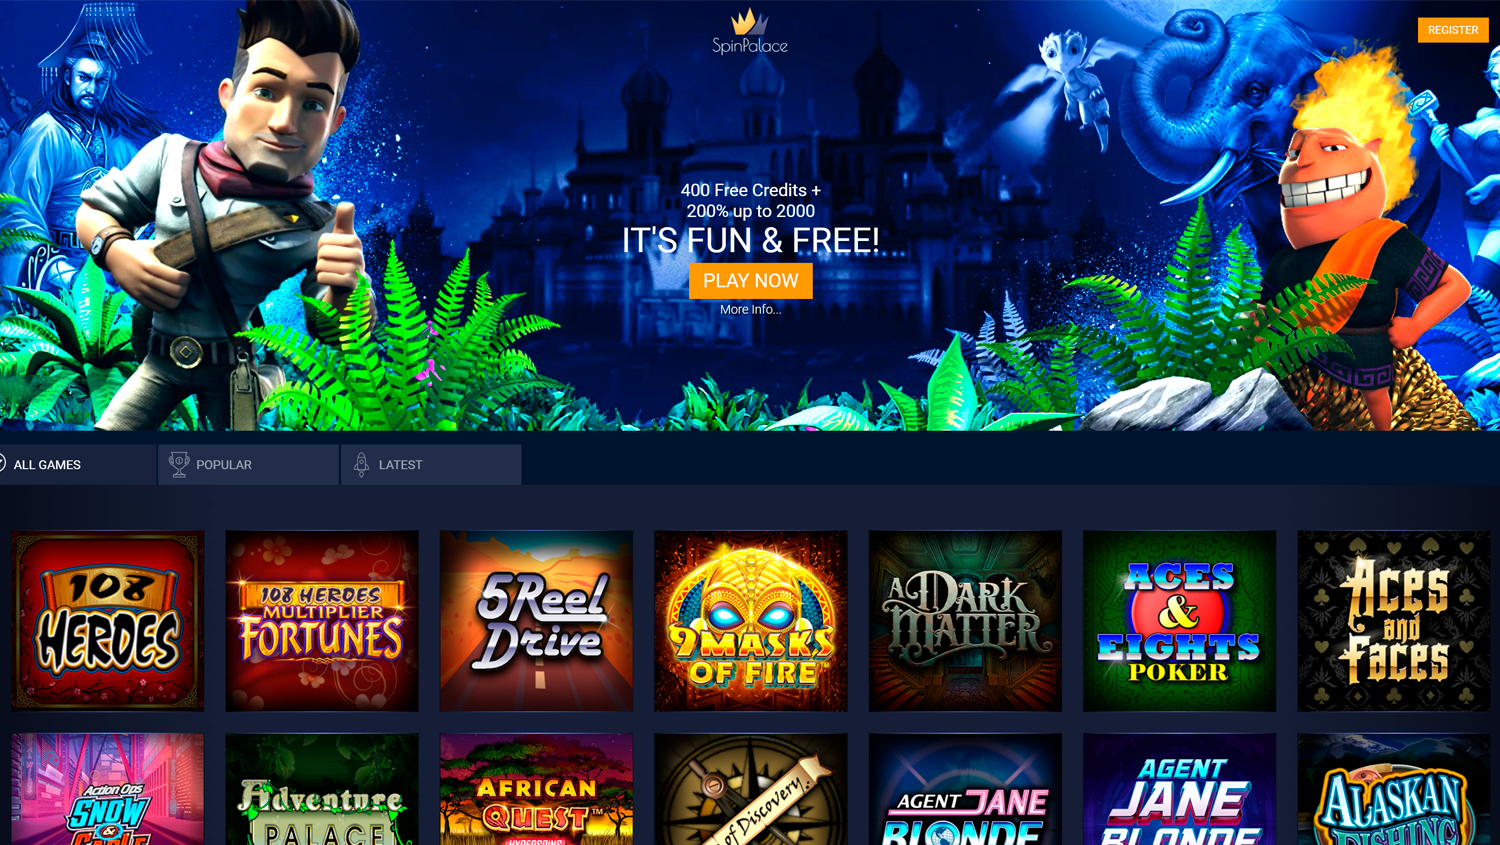 Main page on Spin Palace Casino site